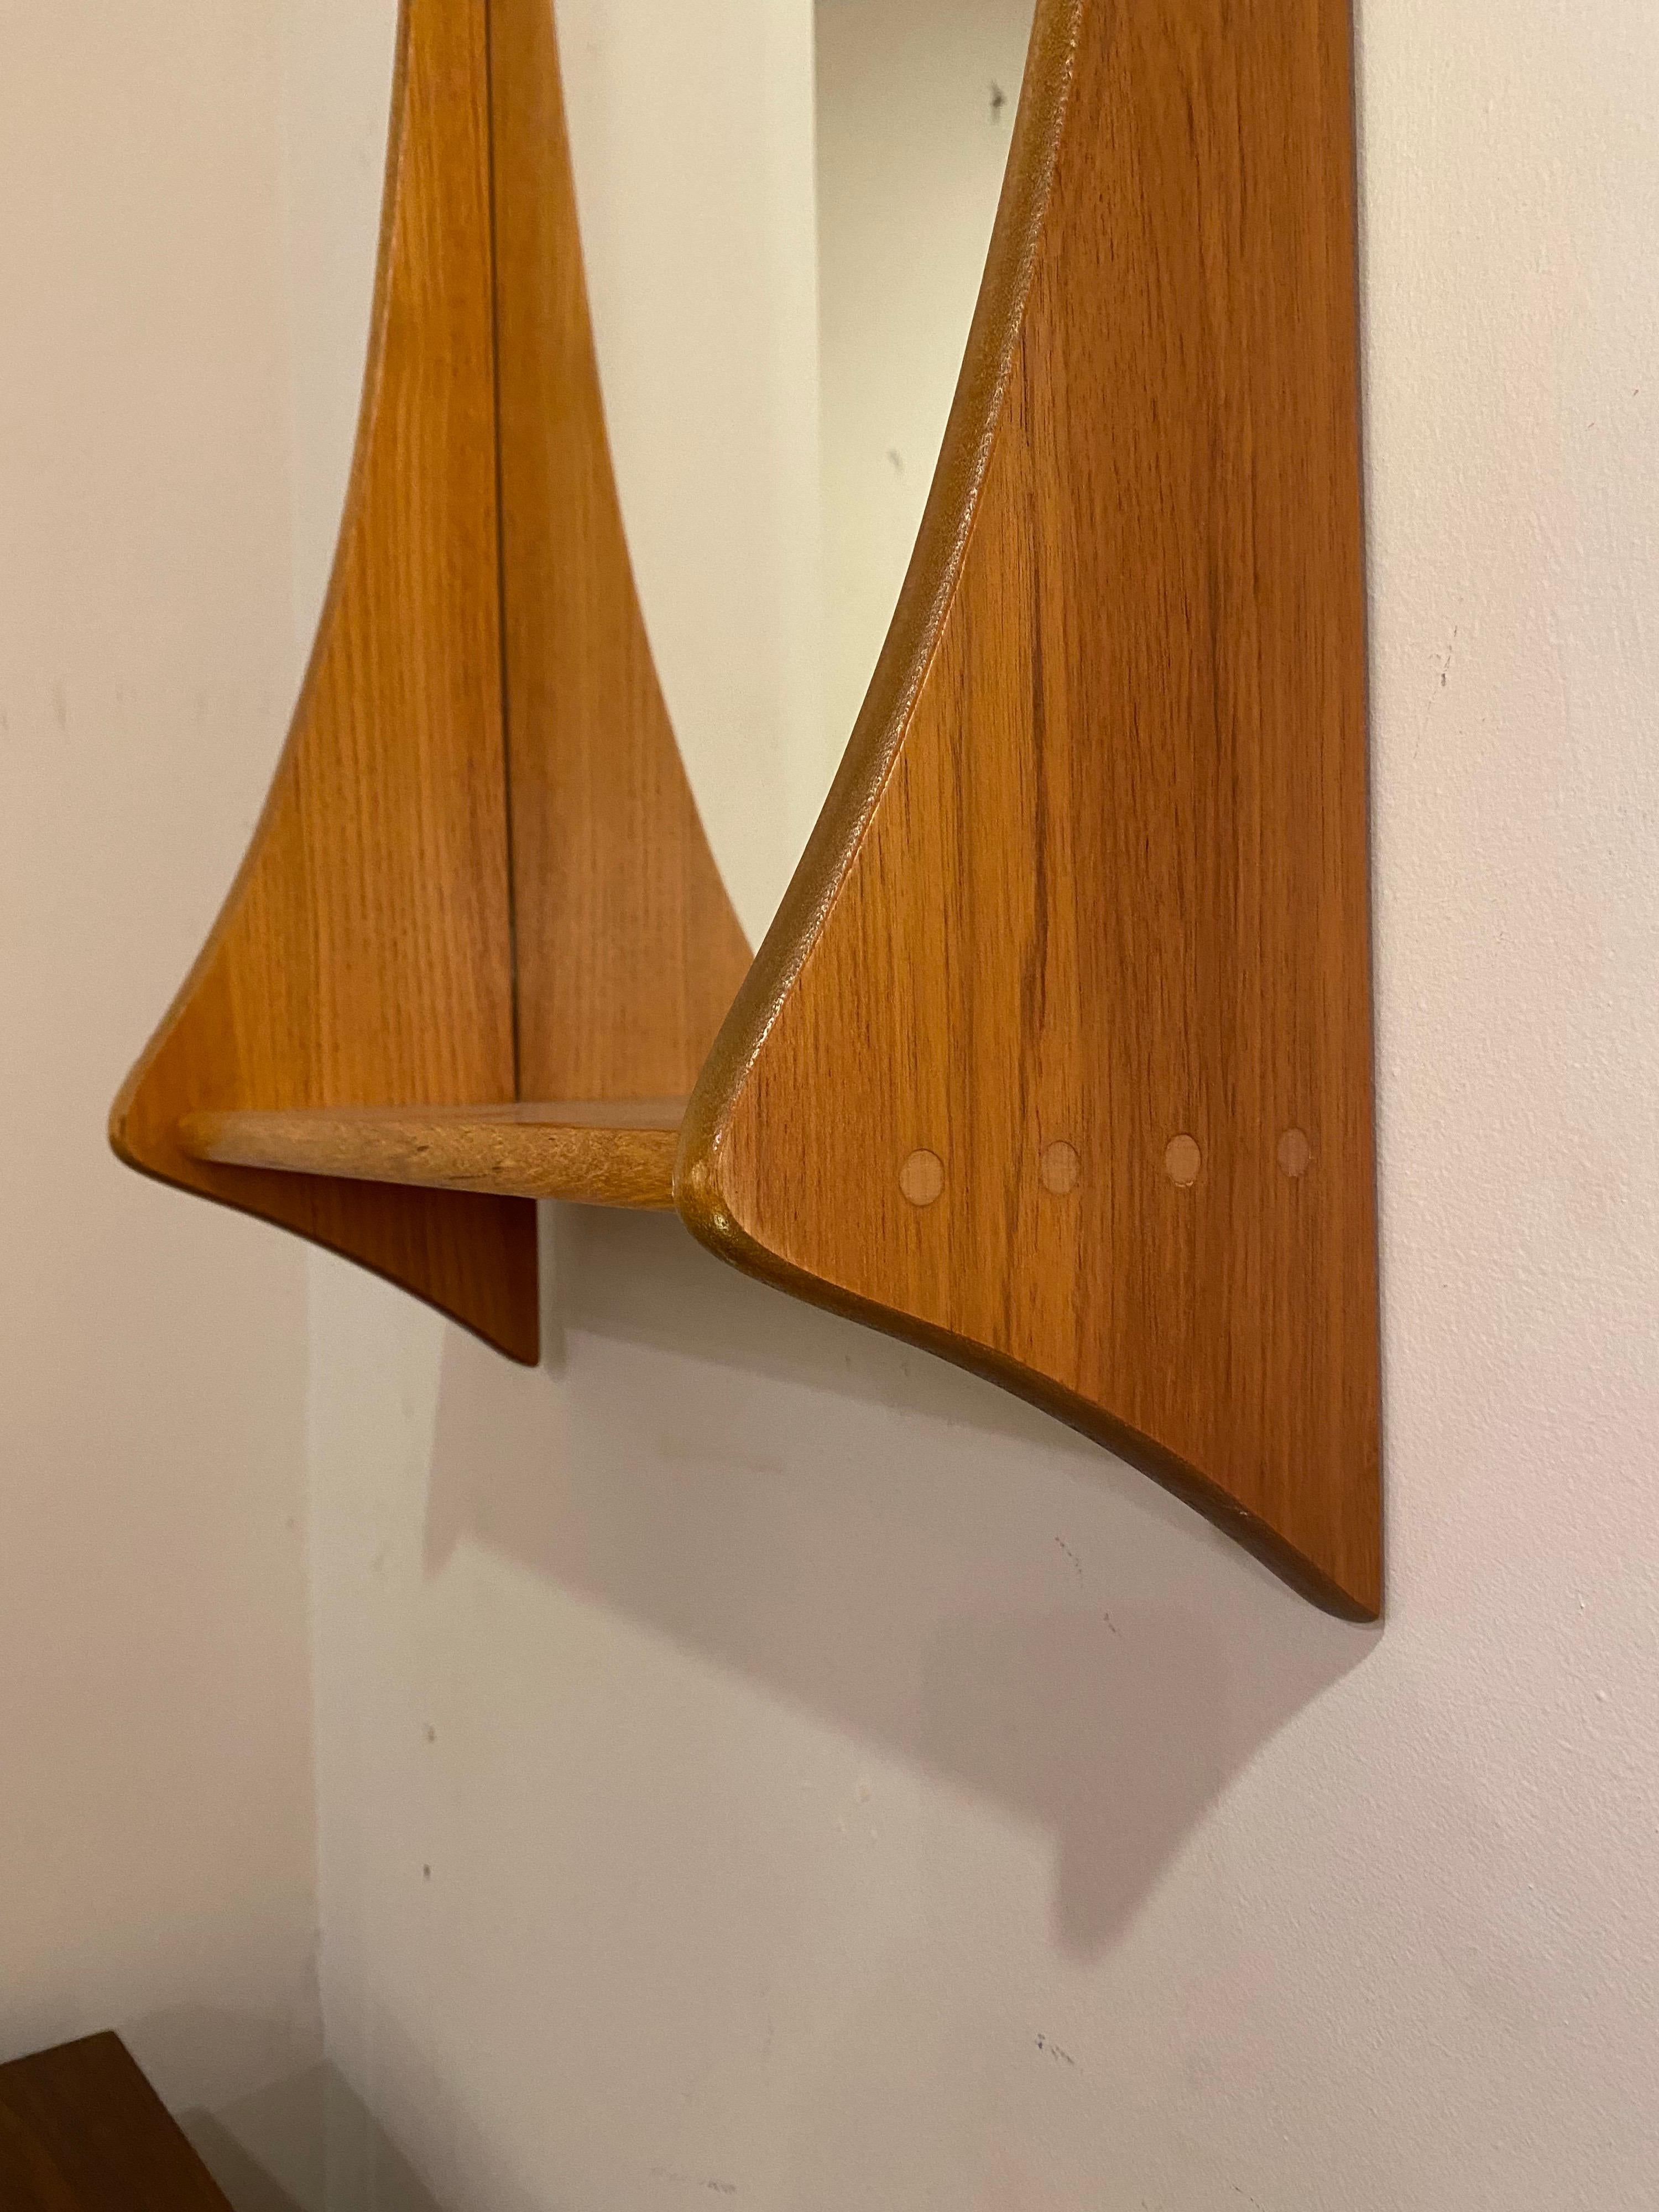 Jansen Spejle teak wall / shelf mirror. Perfect inside a entrance, great spot to throw the keys! Beautiful graceful curved sides with round lighter dowel joinery.